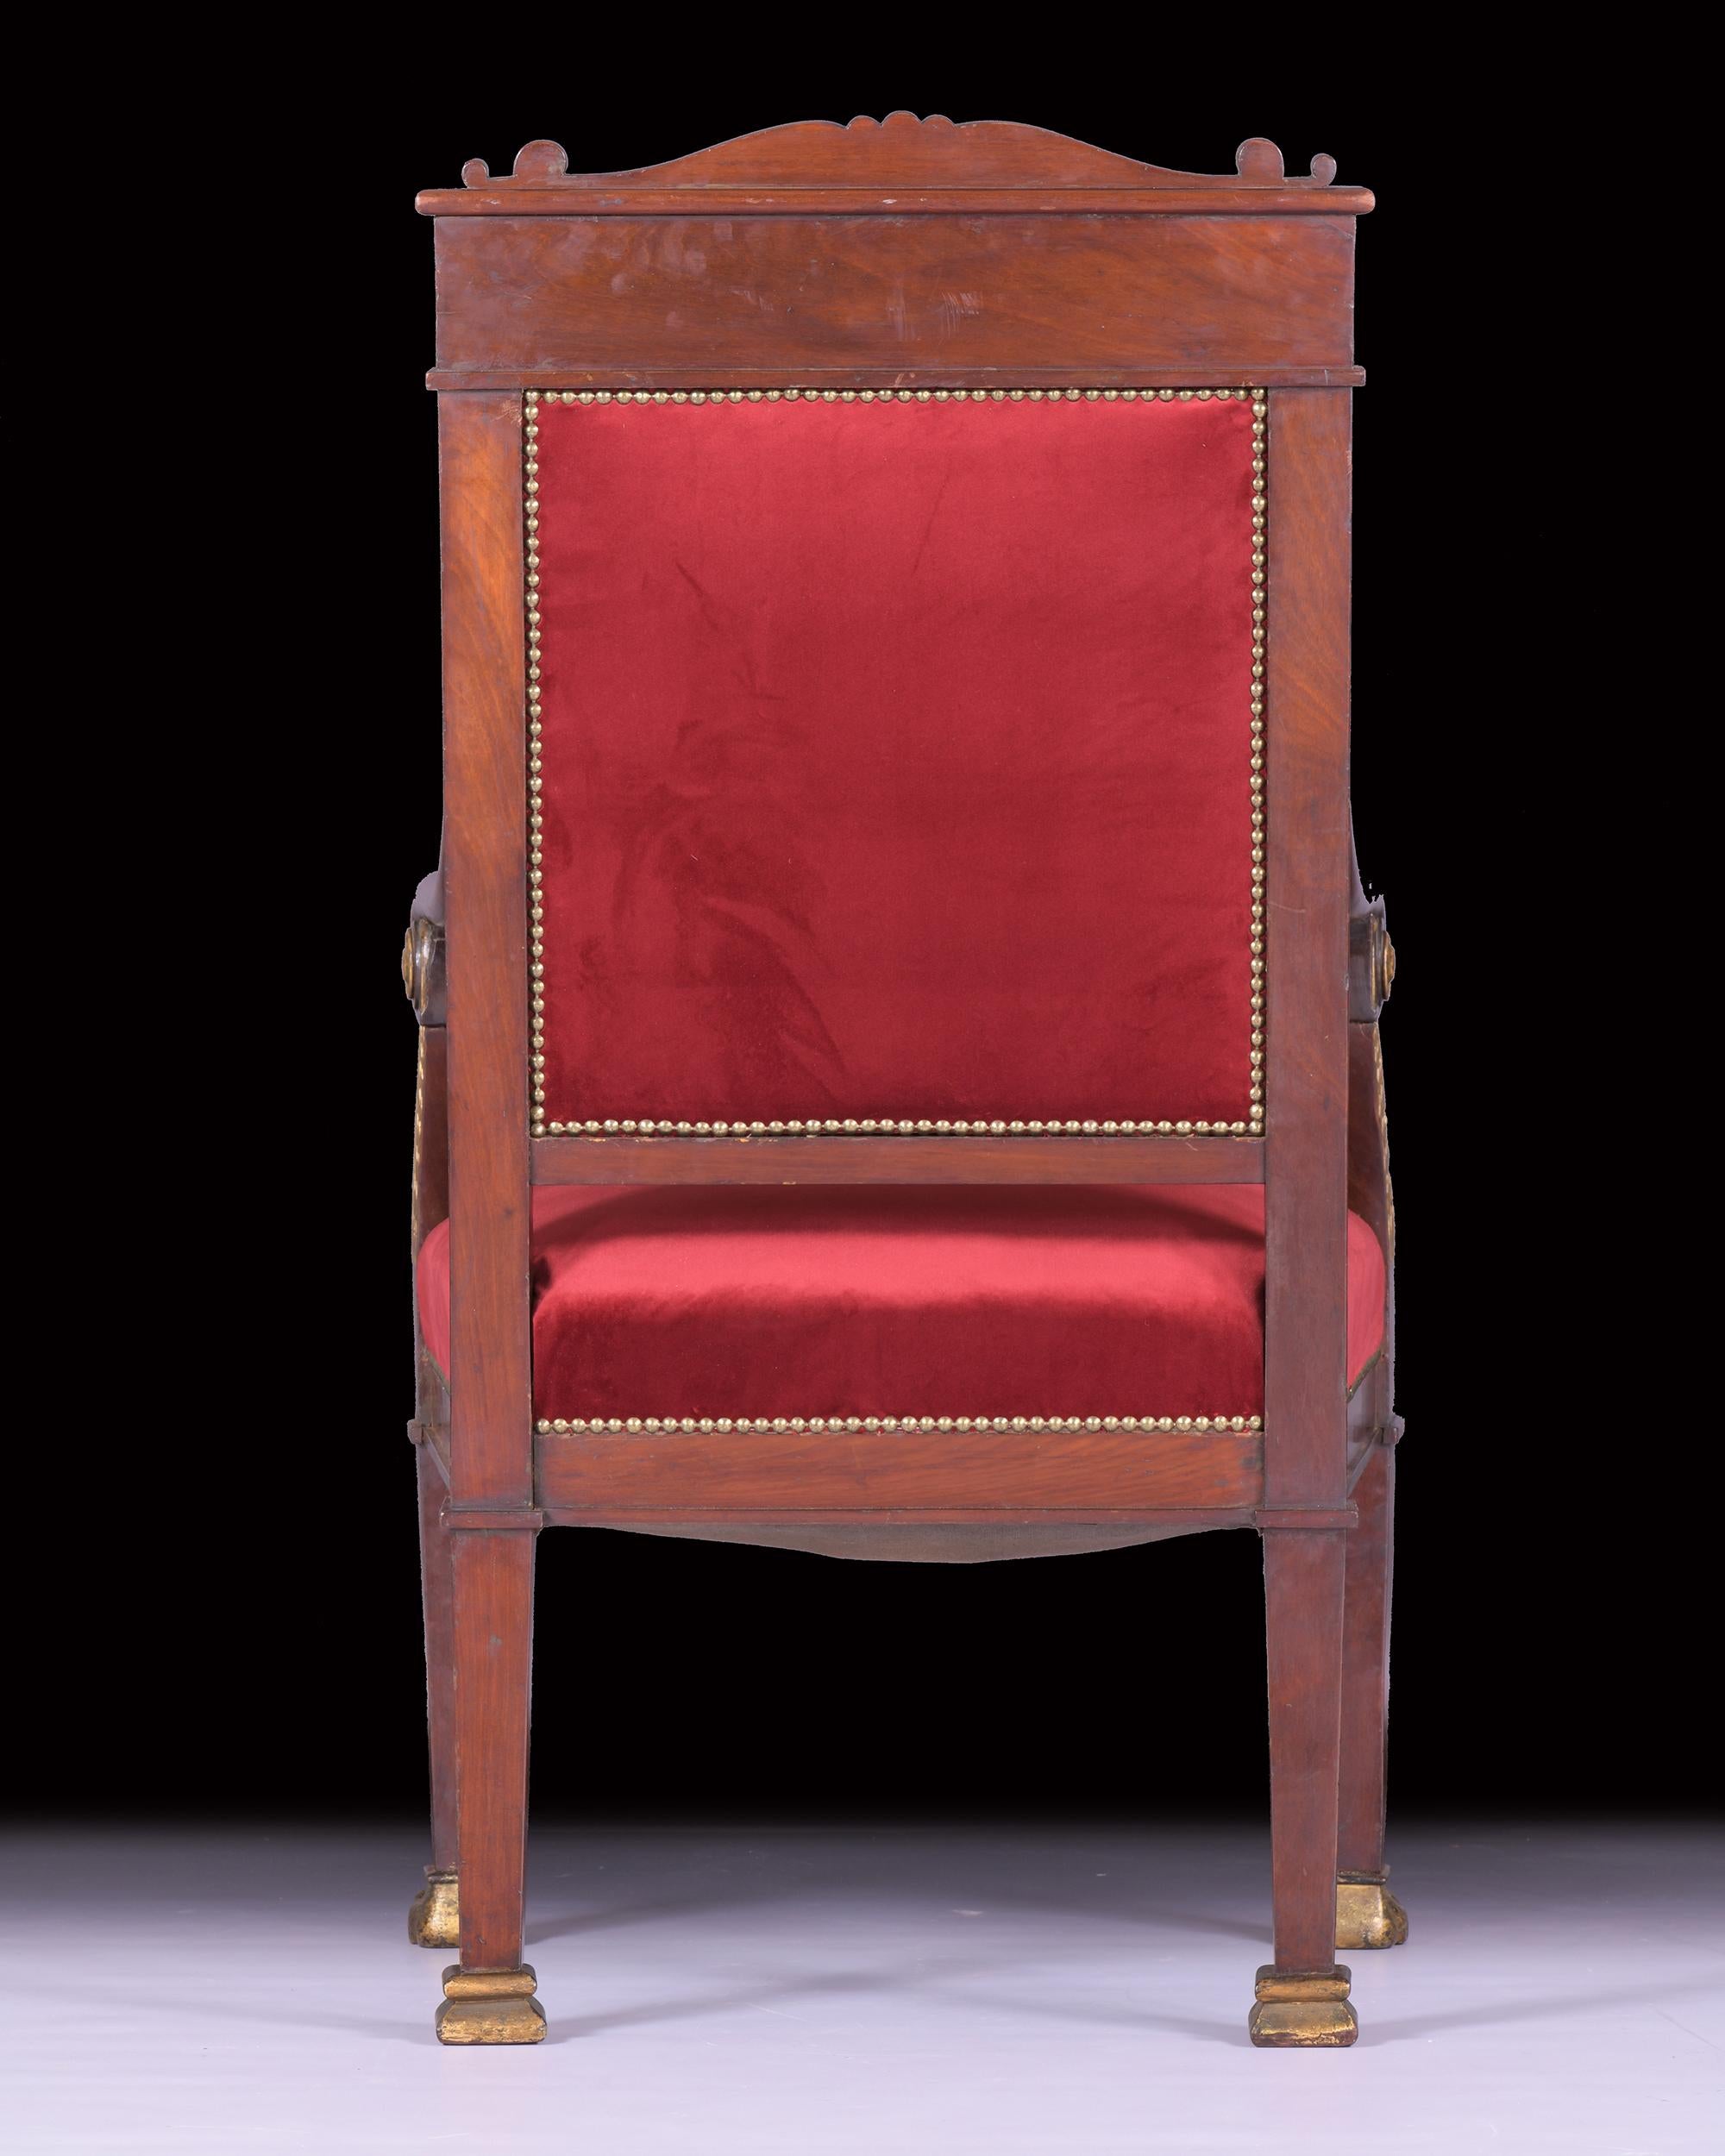 Mahogany Pair Of Early 19th C French Empire Armchairs In The Manner Of Jacob-Desmalter For Sale